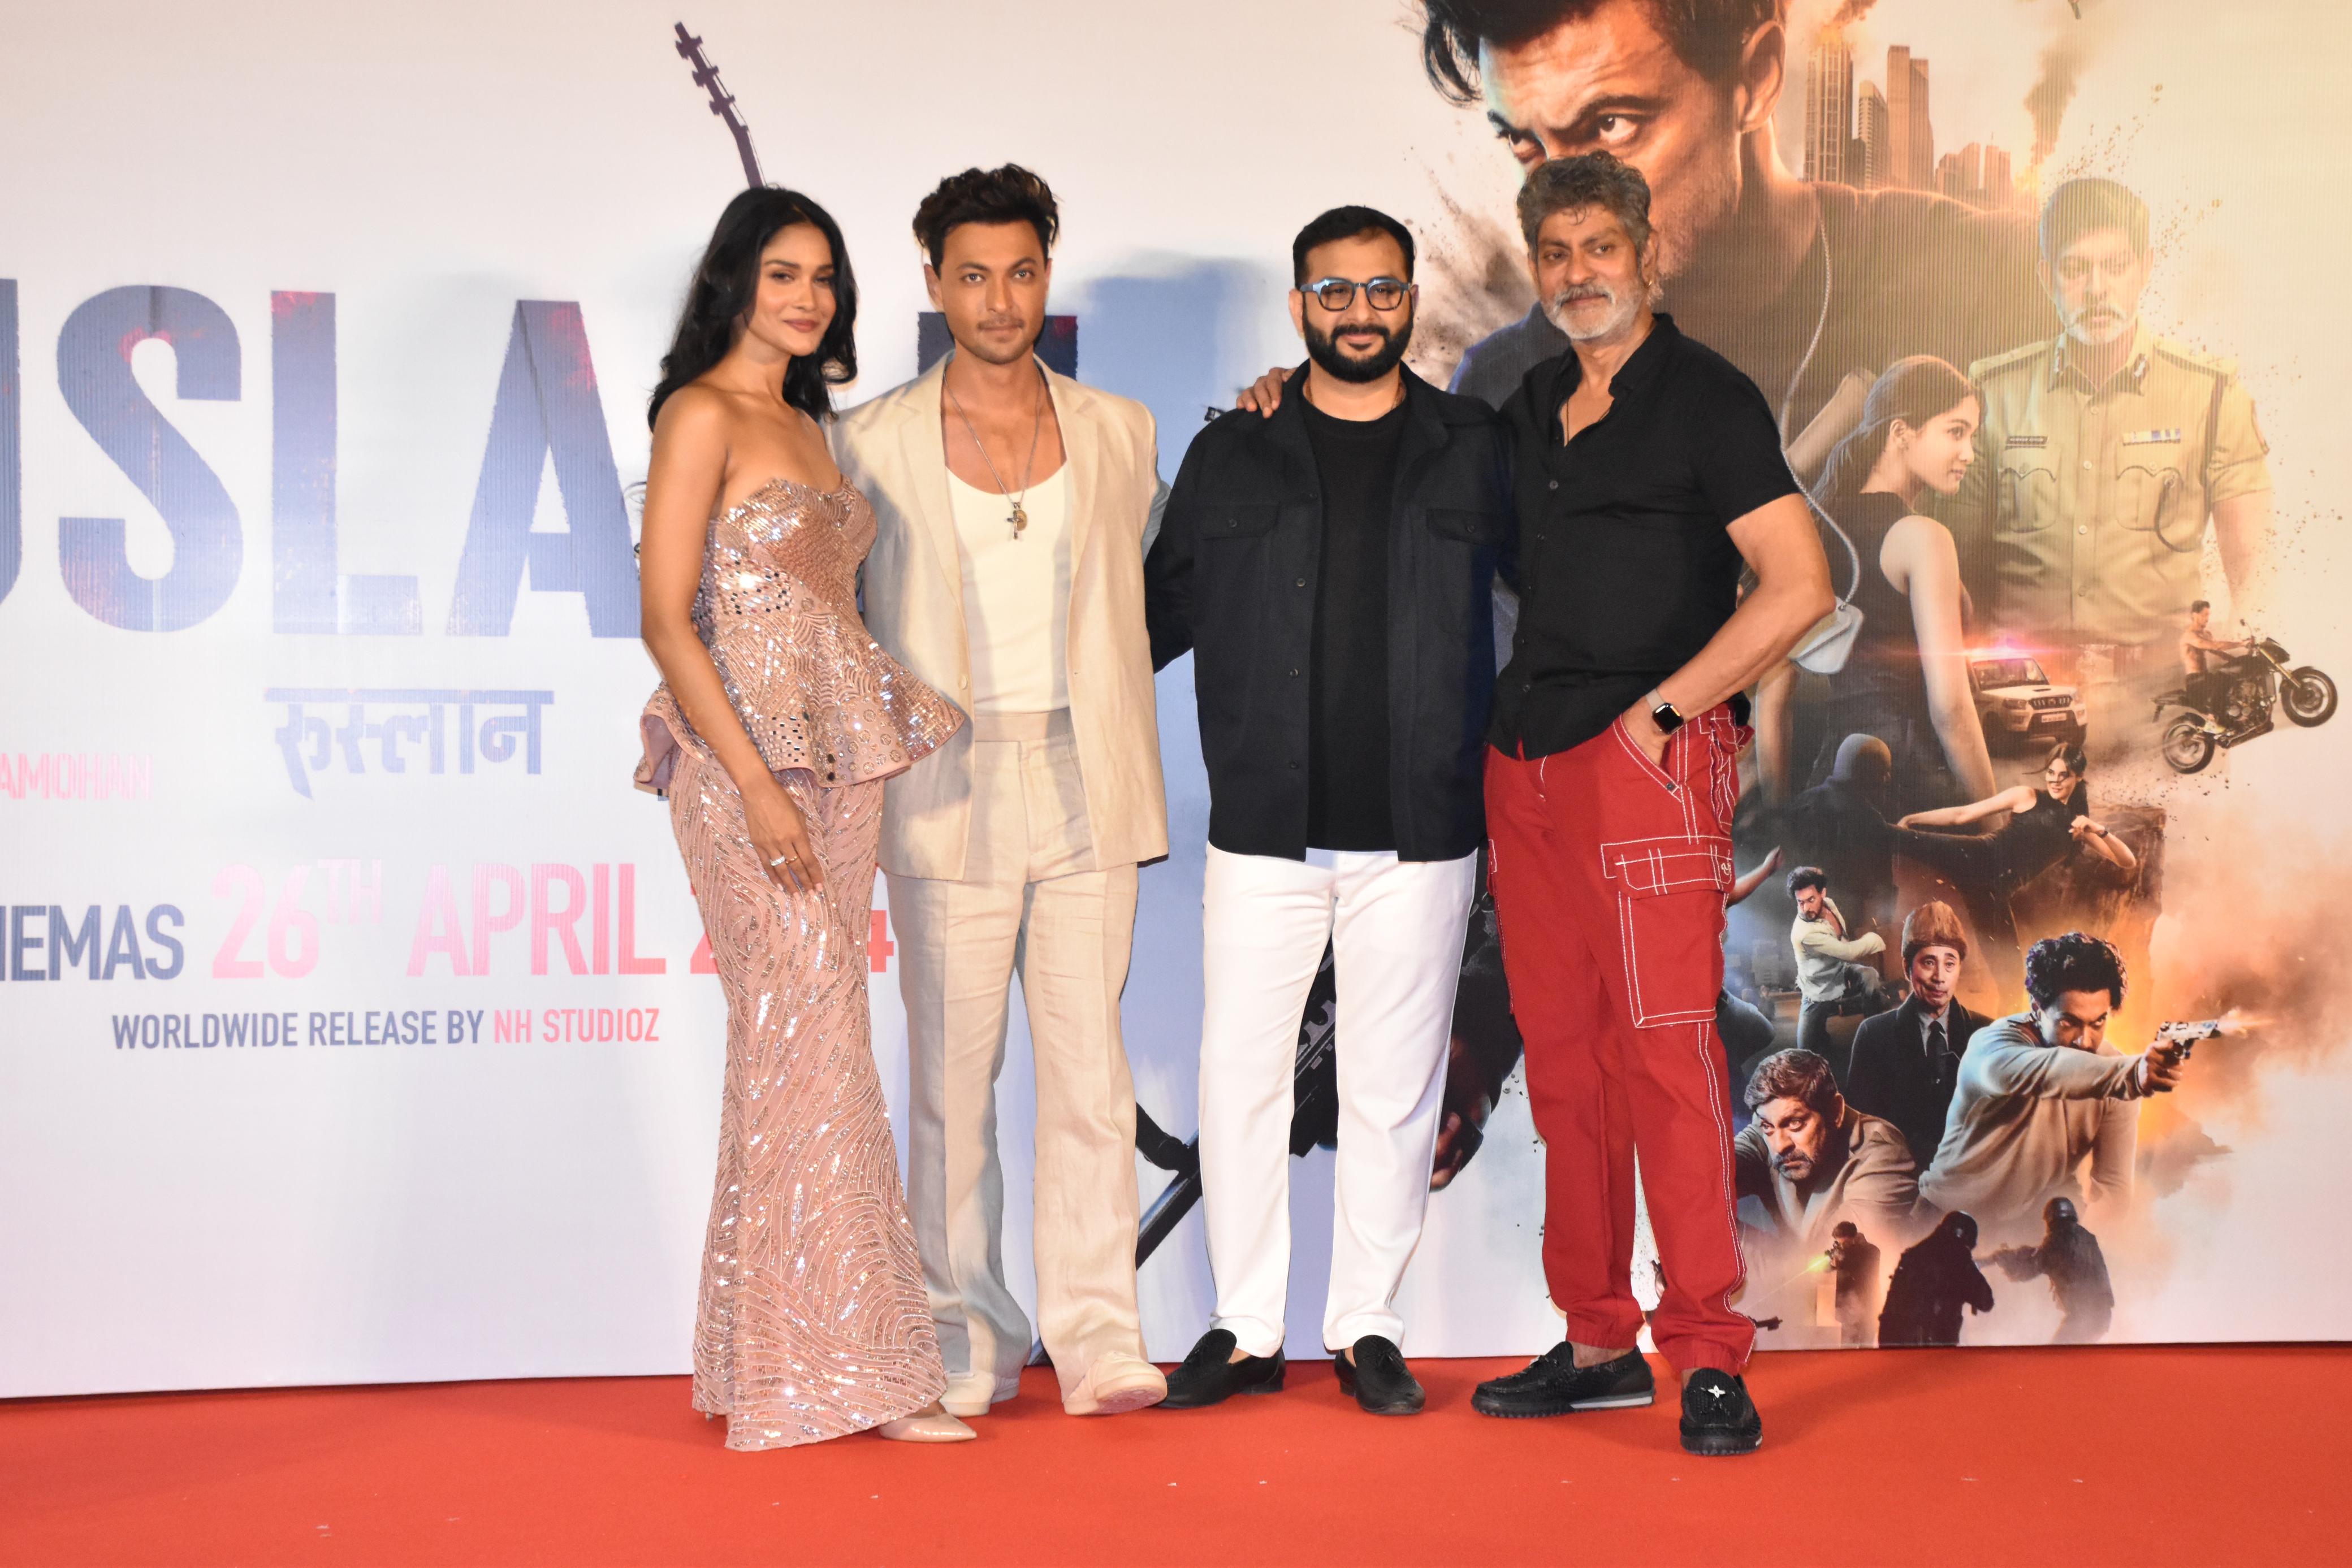 There was a trailer launch for Aayush Sharma's upcoming movie 'Ruslaan'